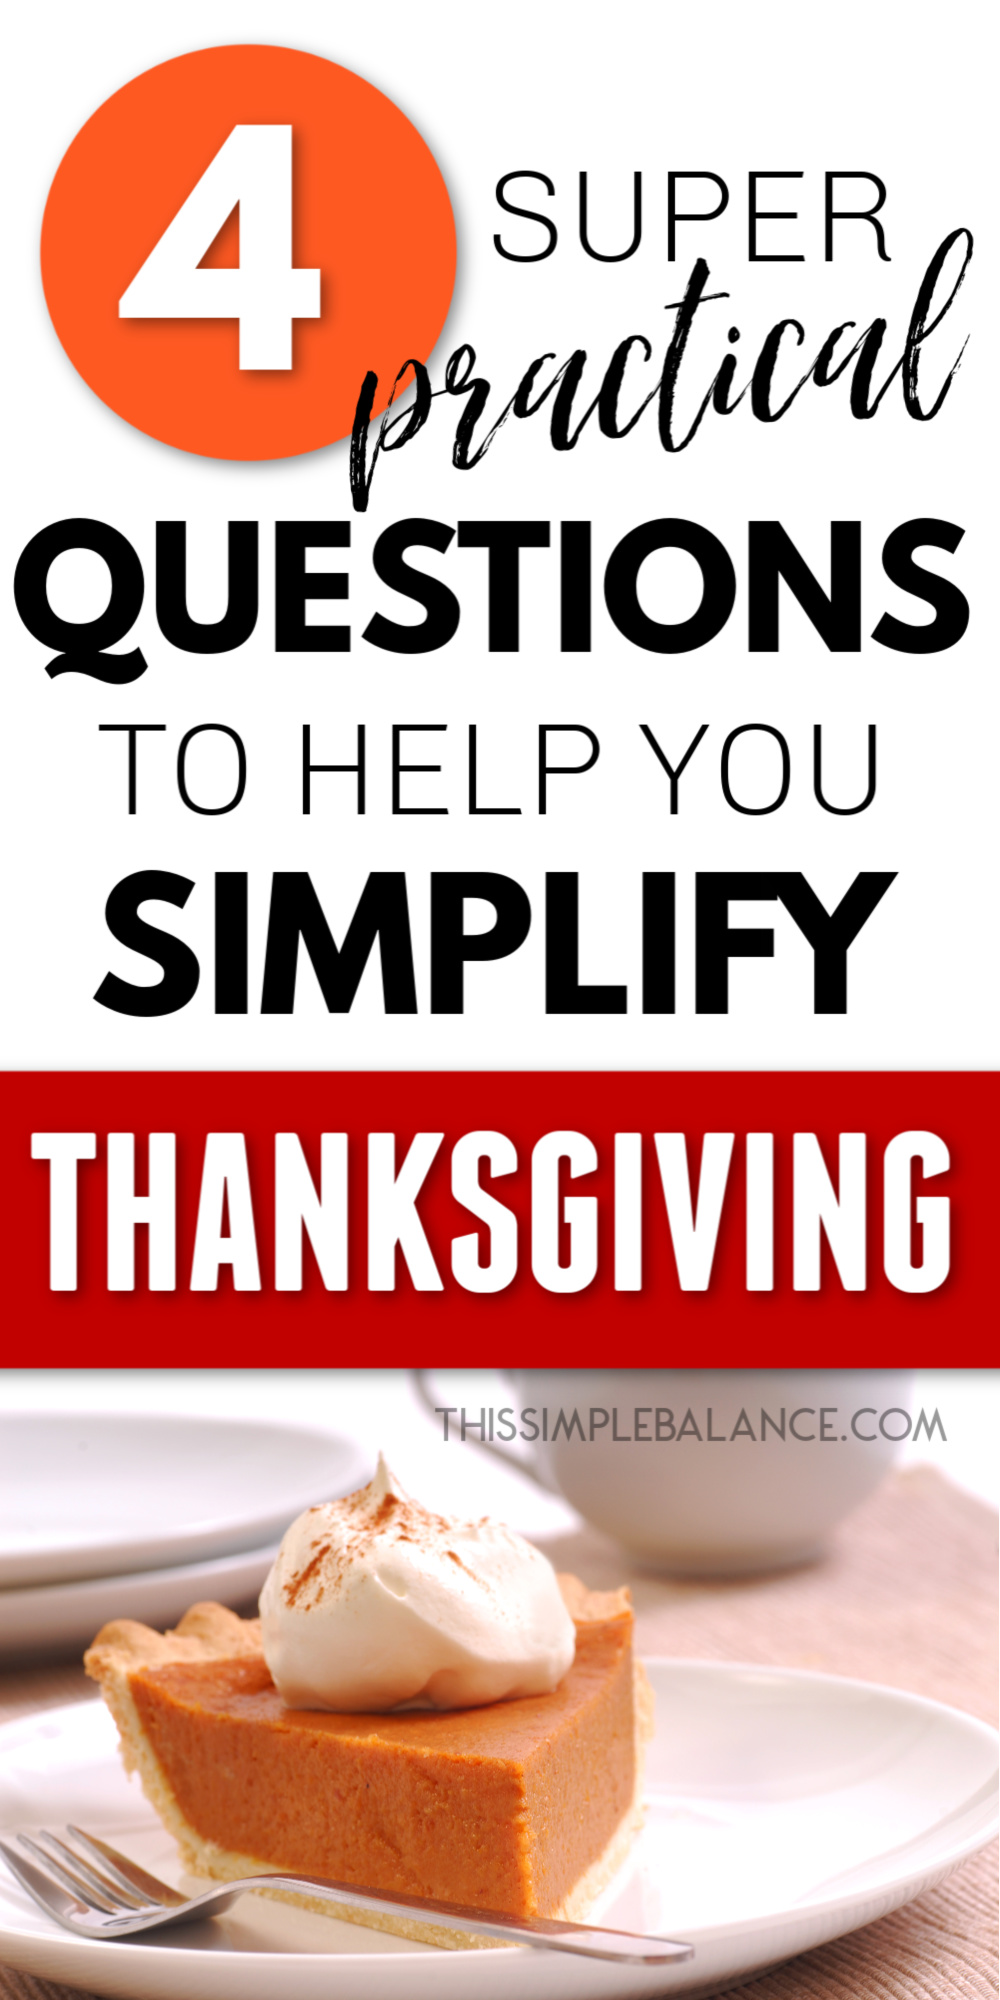 pumpkin pie with whip cream and cinnamon on white plate, with text overlay, "4 super practical questions to help you simplify thanksgiving"